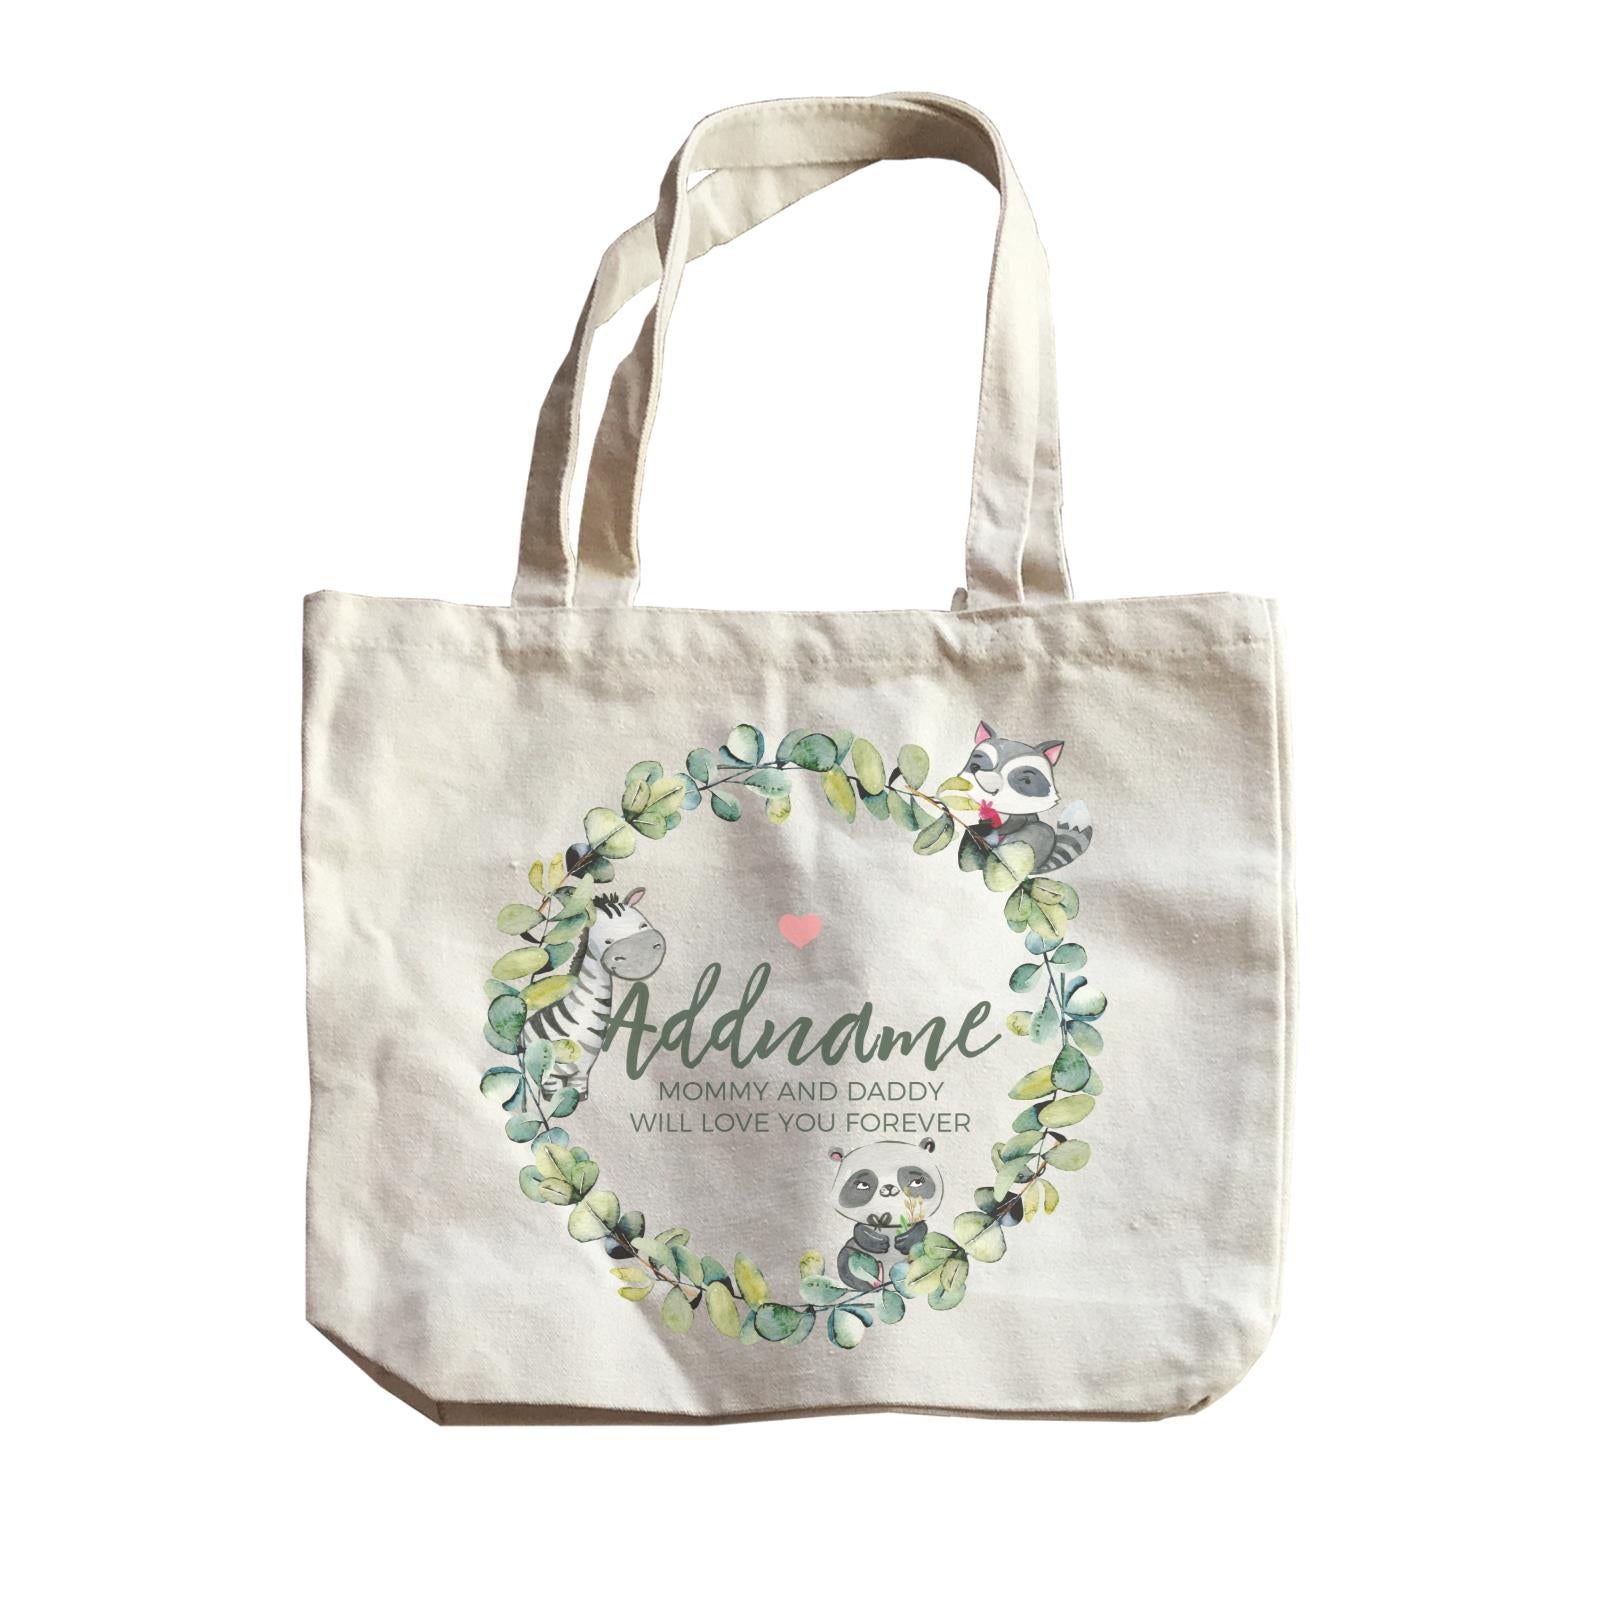 Watercolour Panda Zebra and Racoon Leaf Wreath Personalizable with Name and Text Canvas Bag